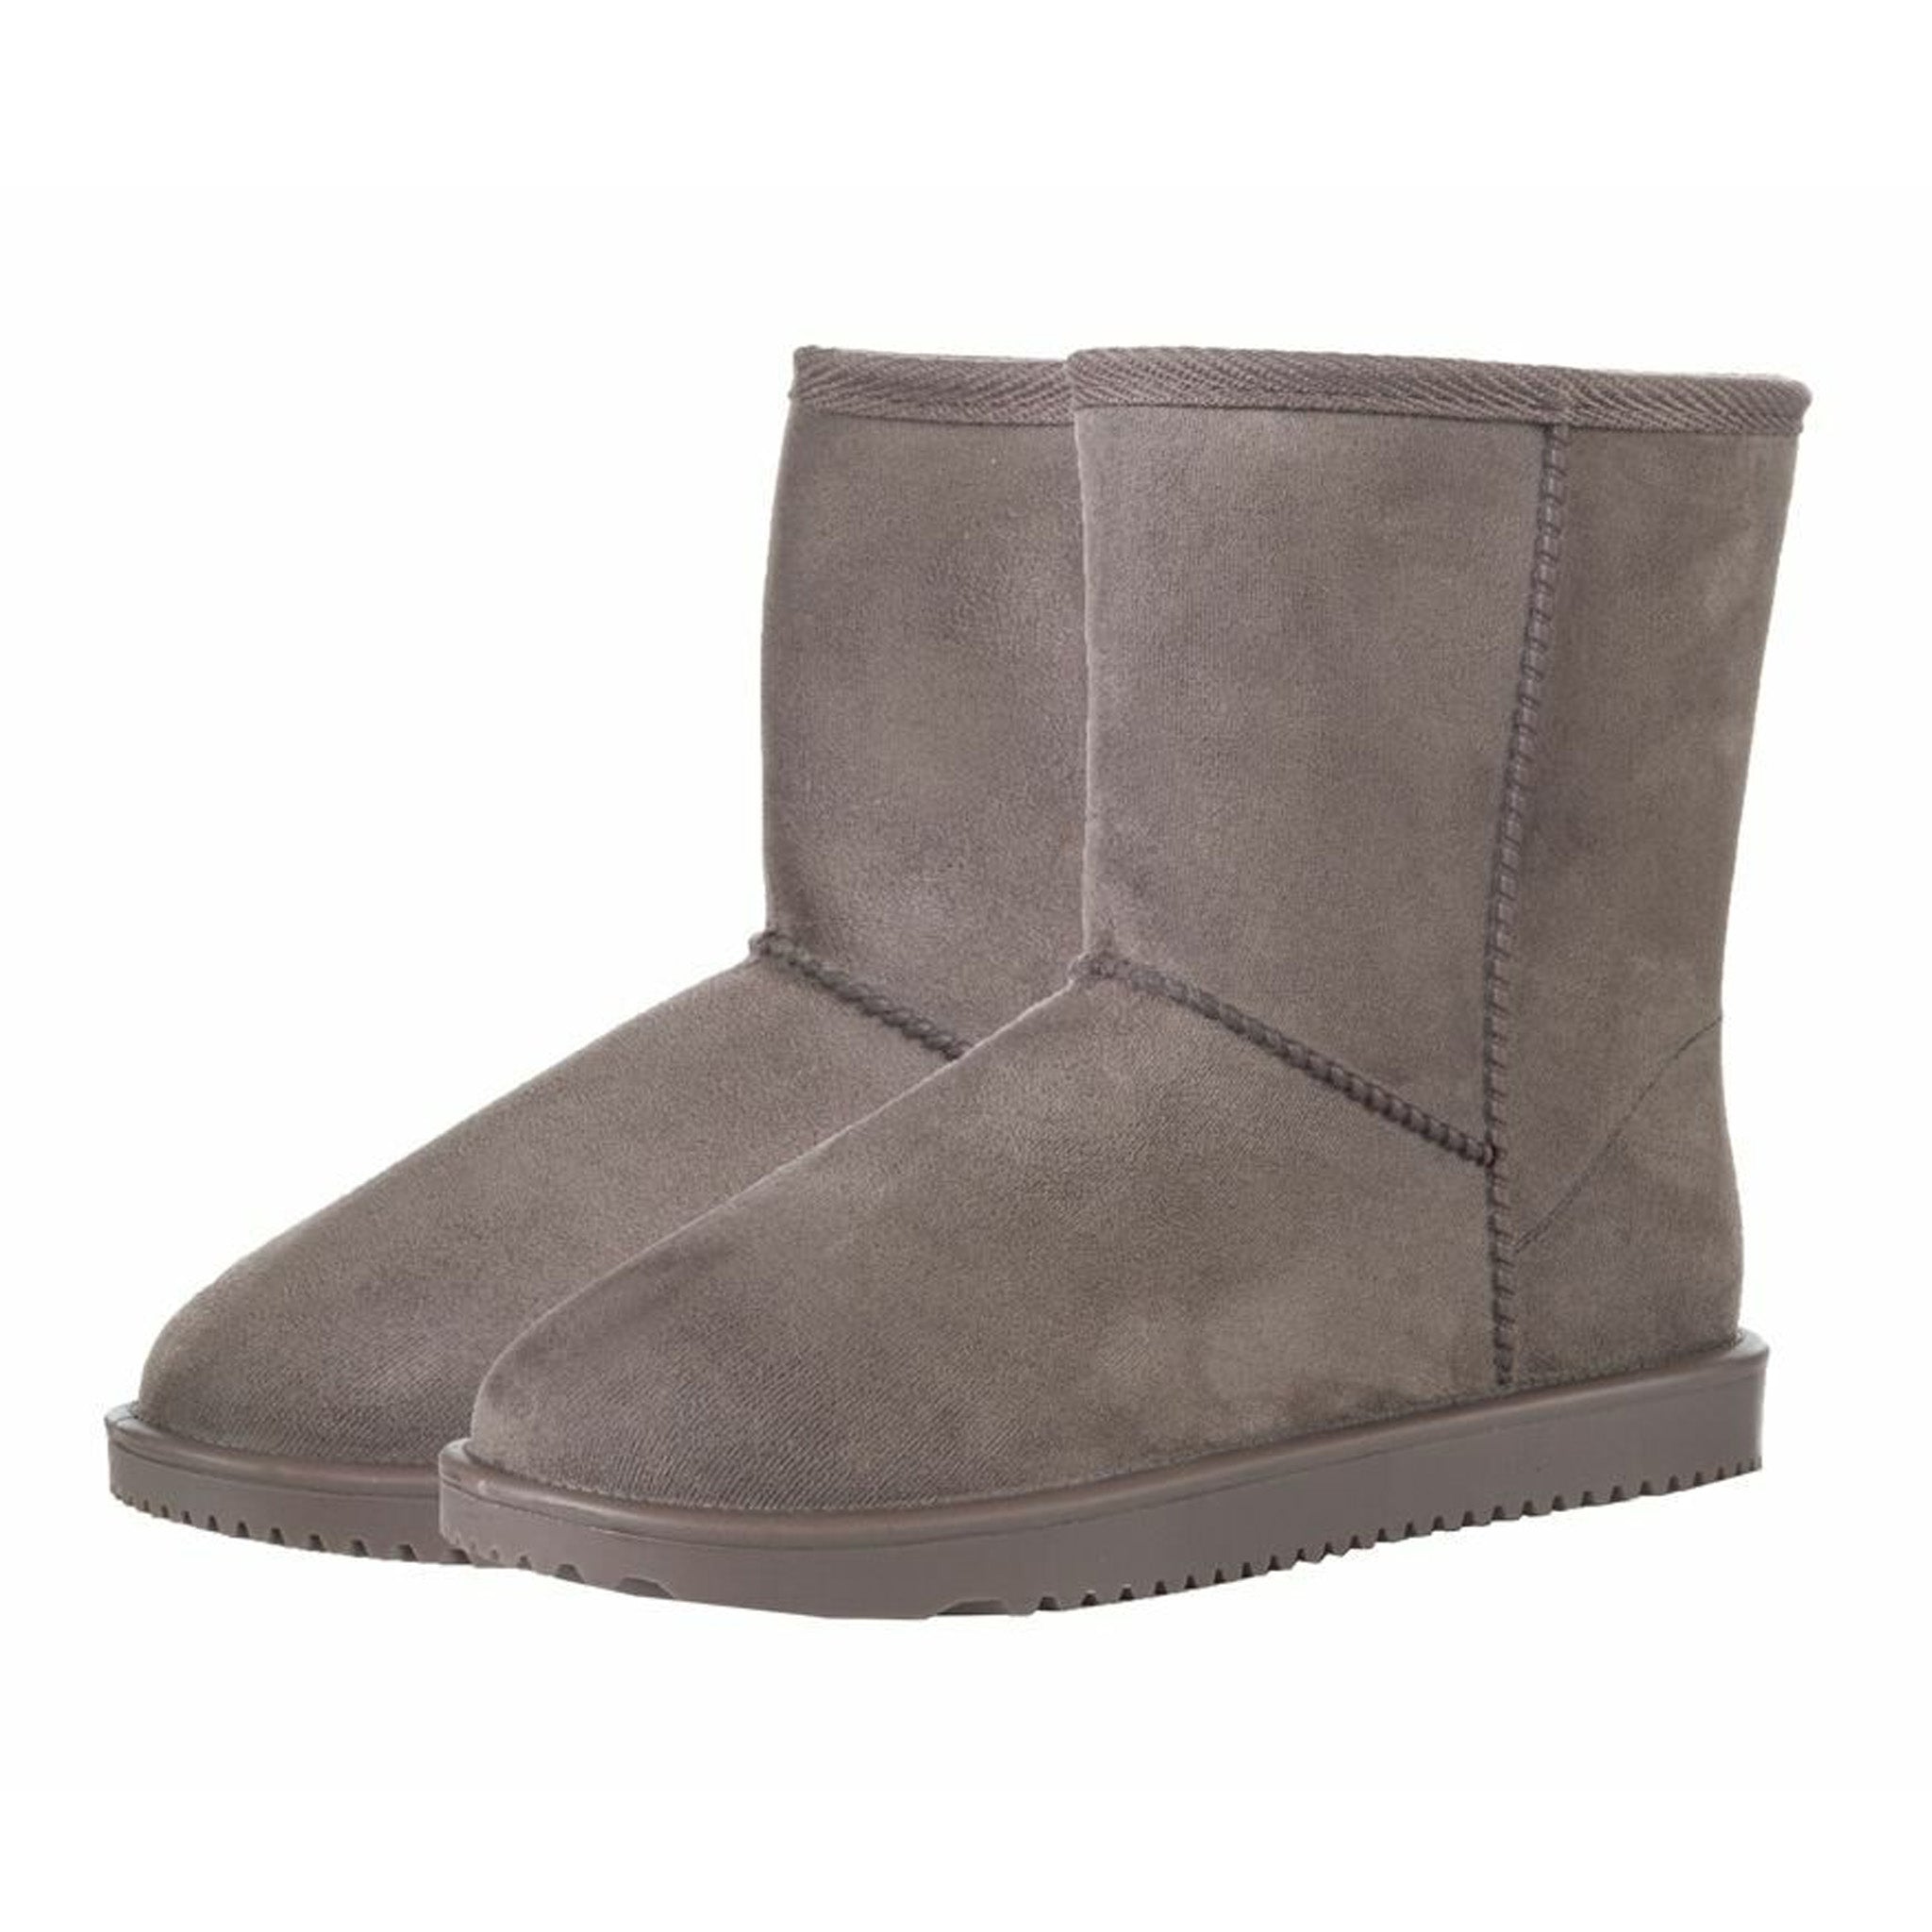 HKM Children's Davos All Weather Boots 11126 Taupe